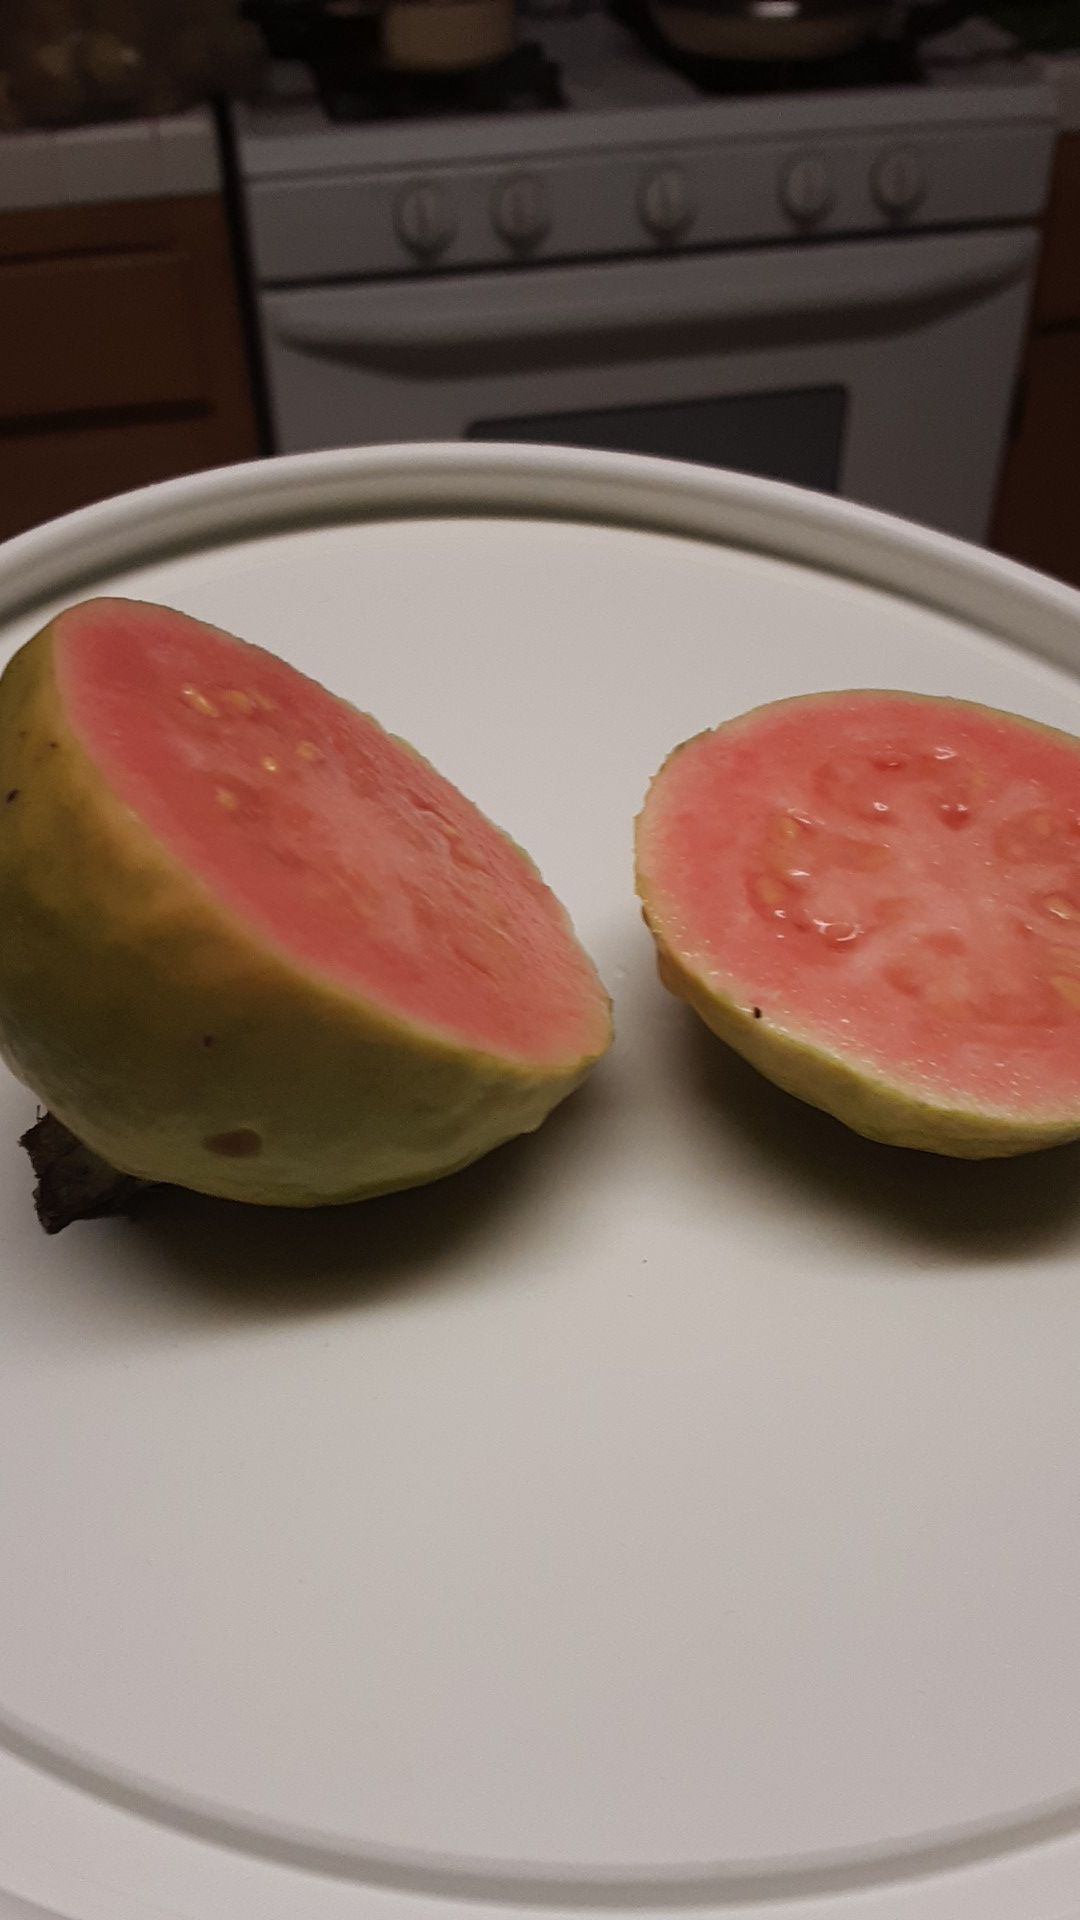 Pink guava for sale